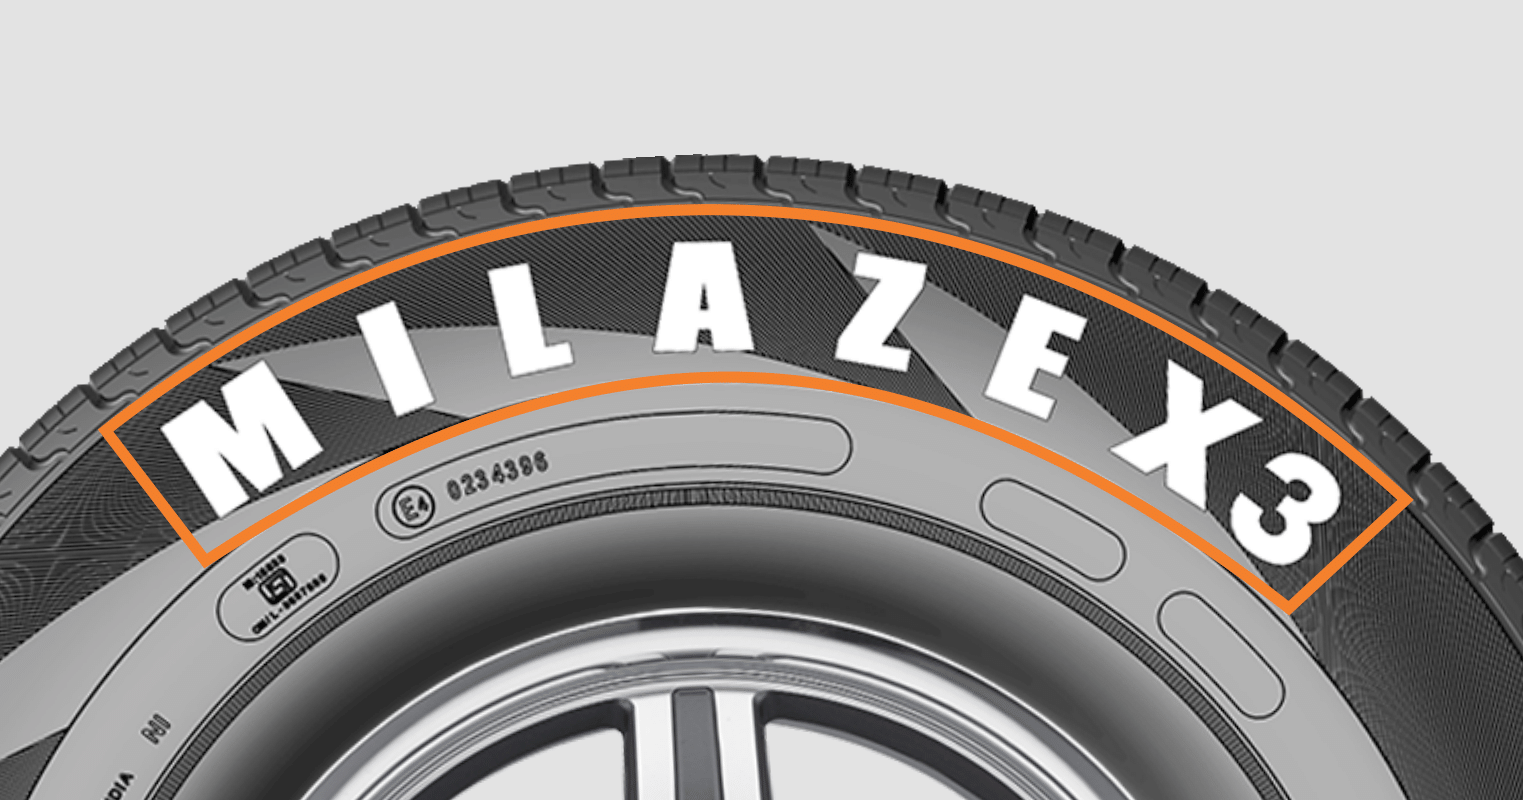 CEAT Tyres - Keeping with CEAT's Promise of making... | Facebook